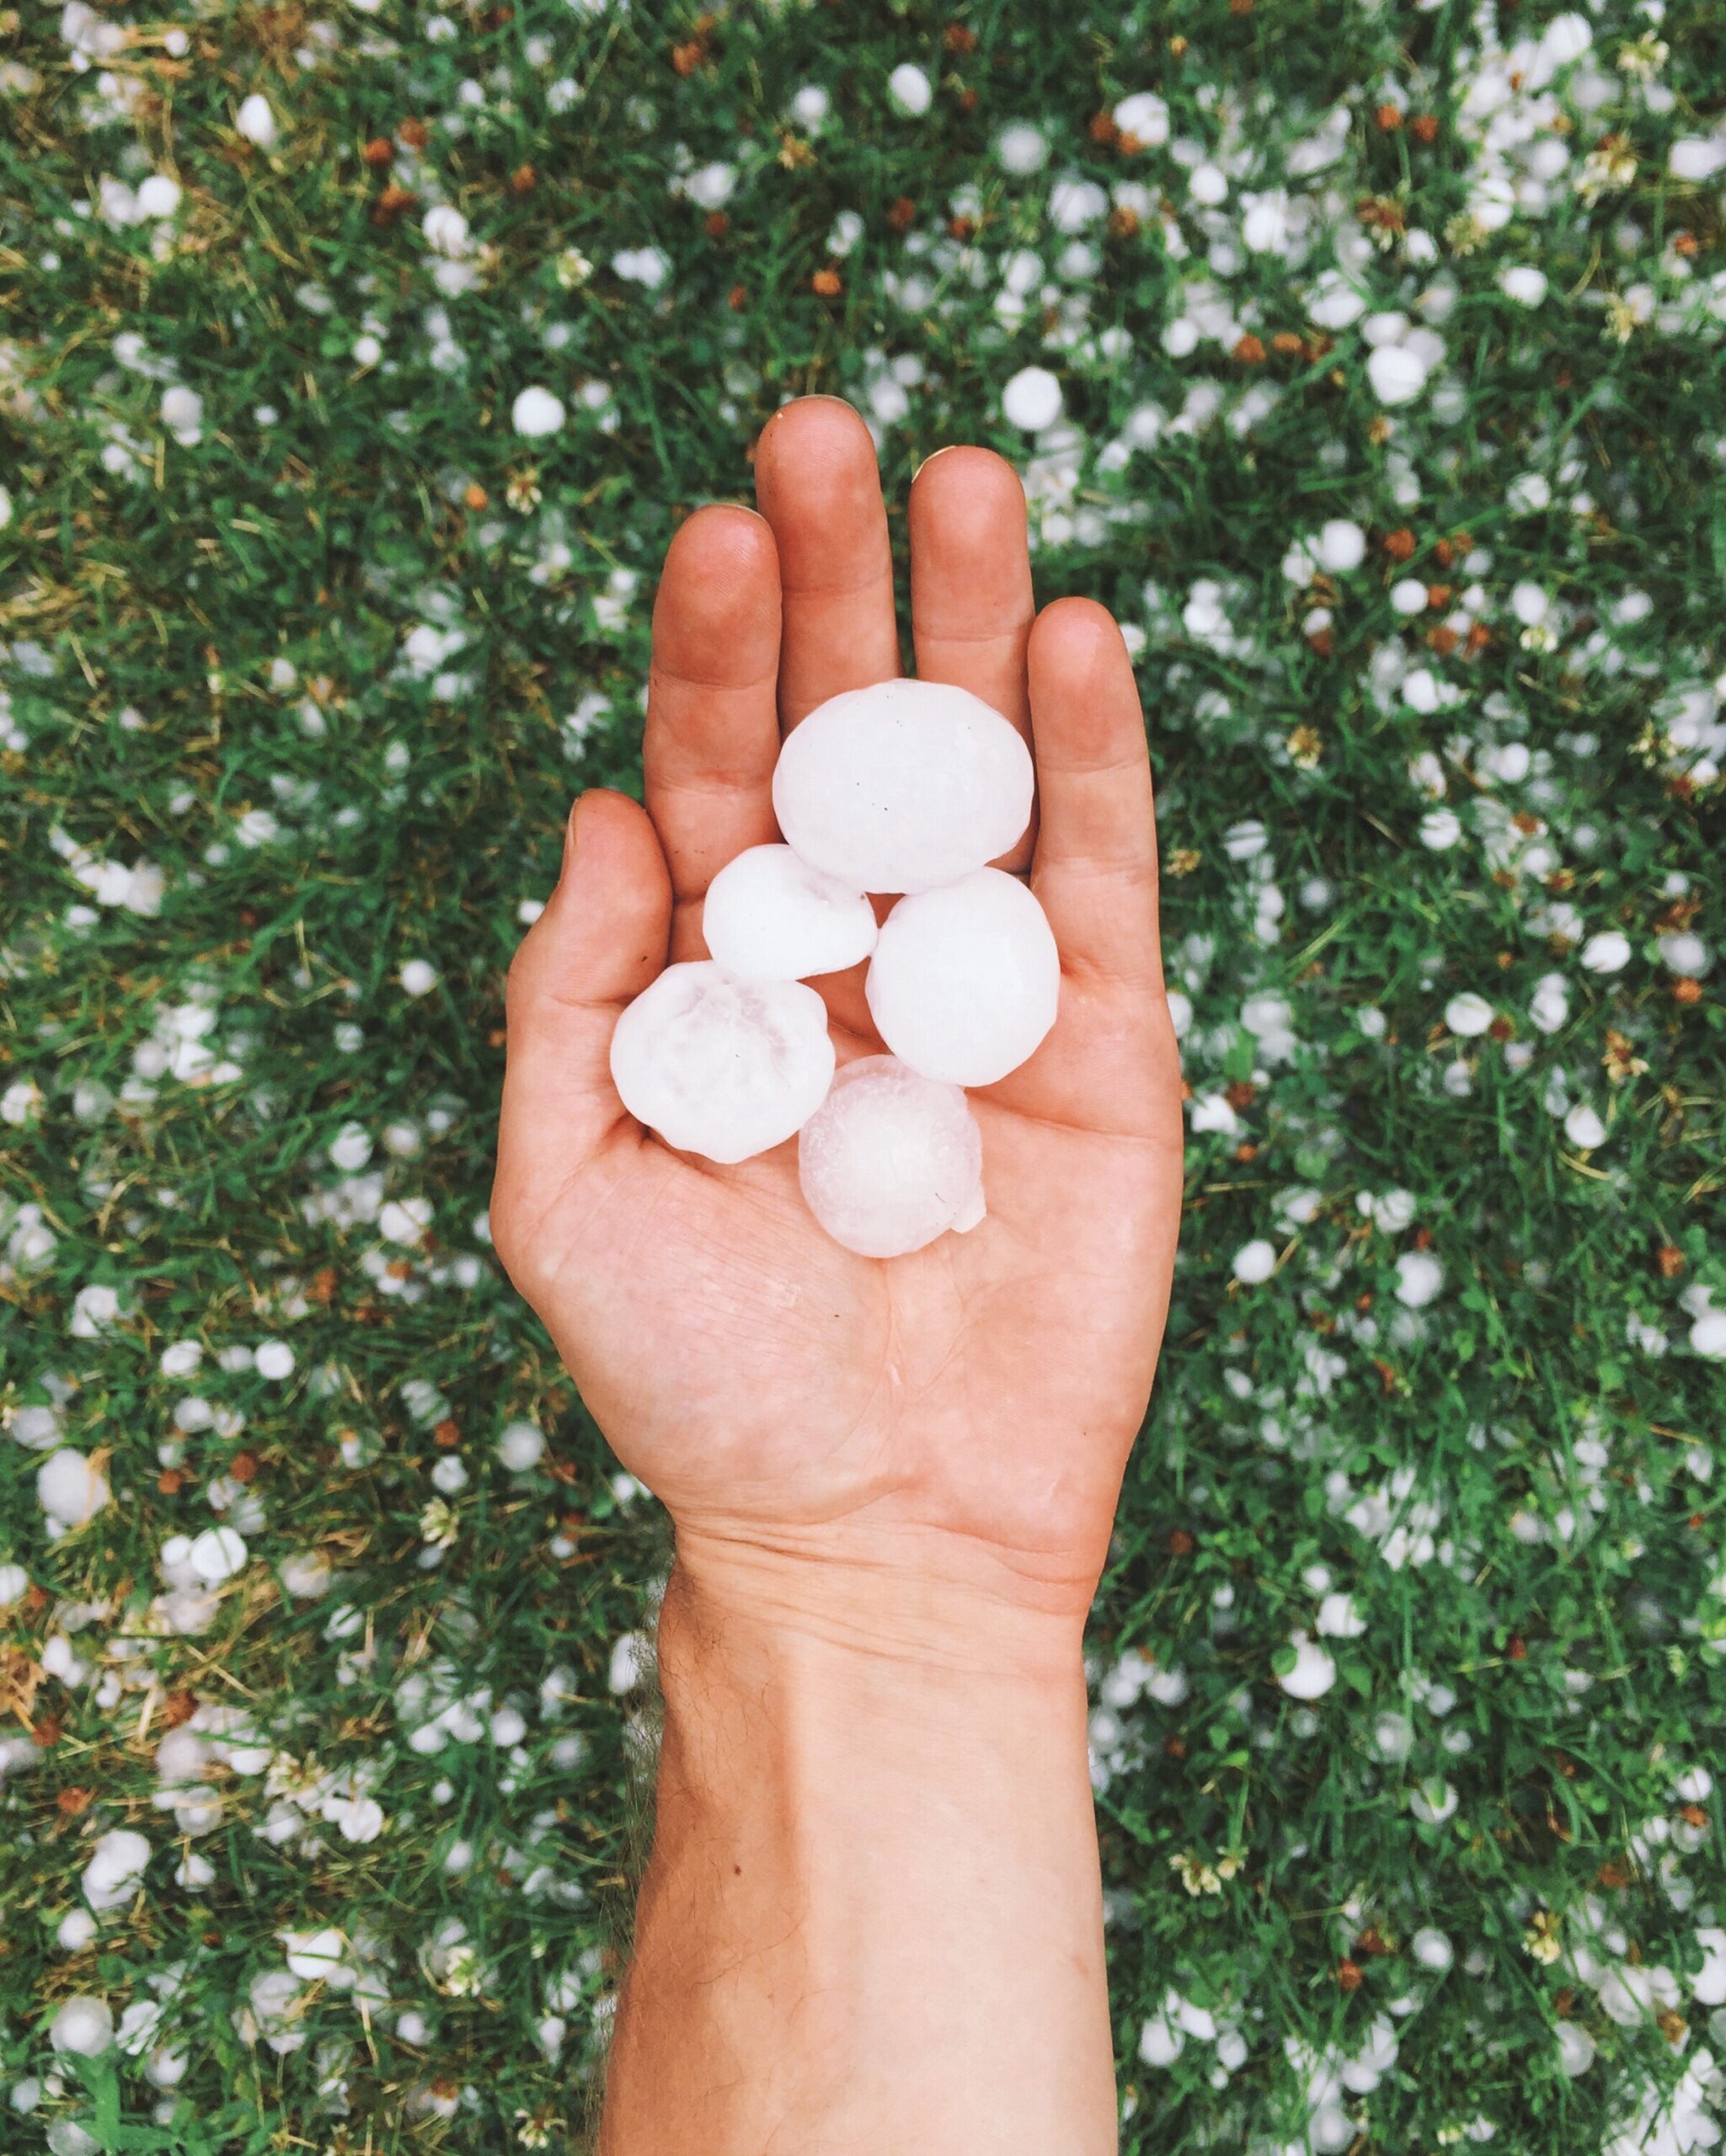 An open hand holding several large hailstones with a lawn scattered with more hailstones in the background, indicative of a recent hailstorm.